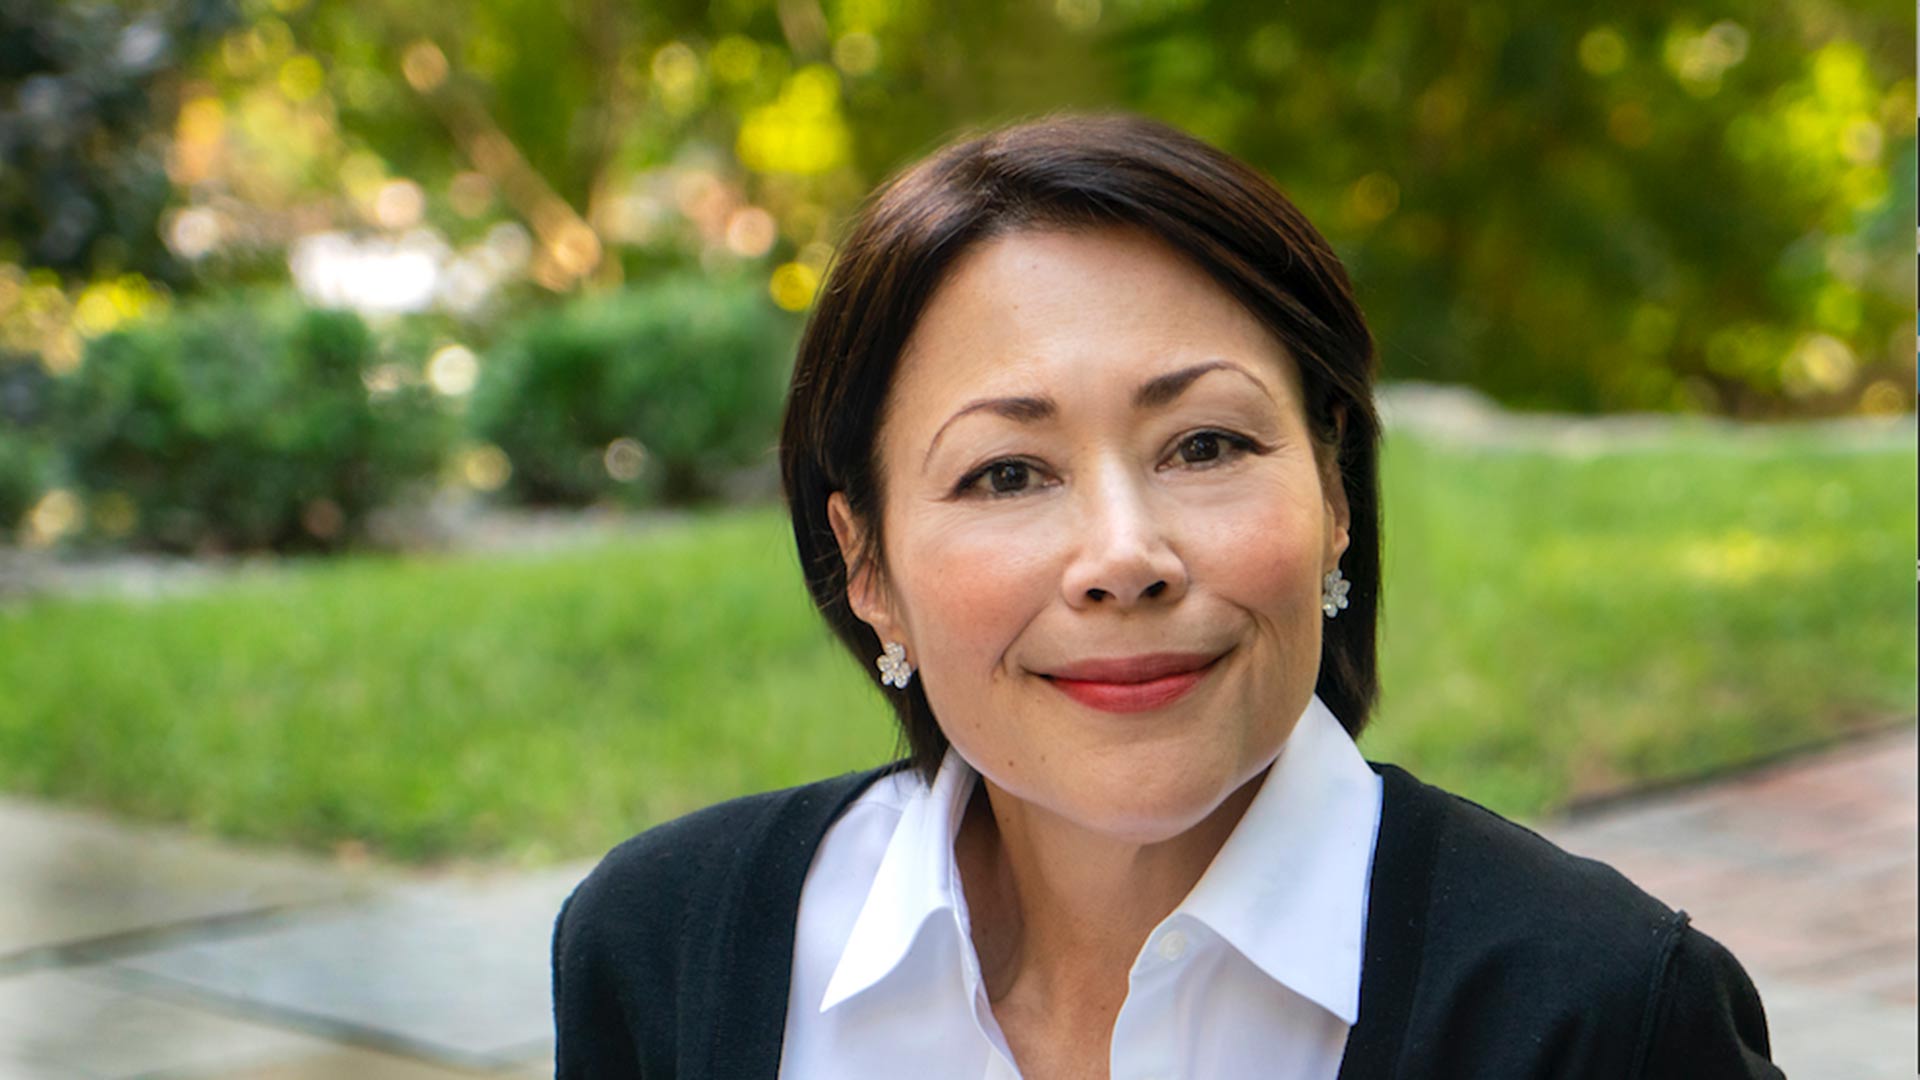 Executive Producer and Reporter Ann Curry